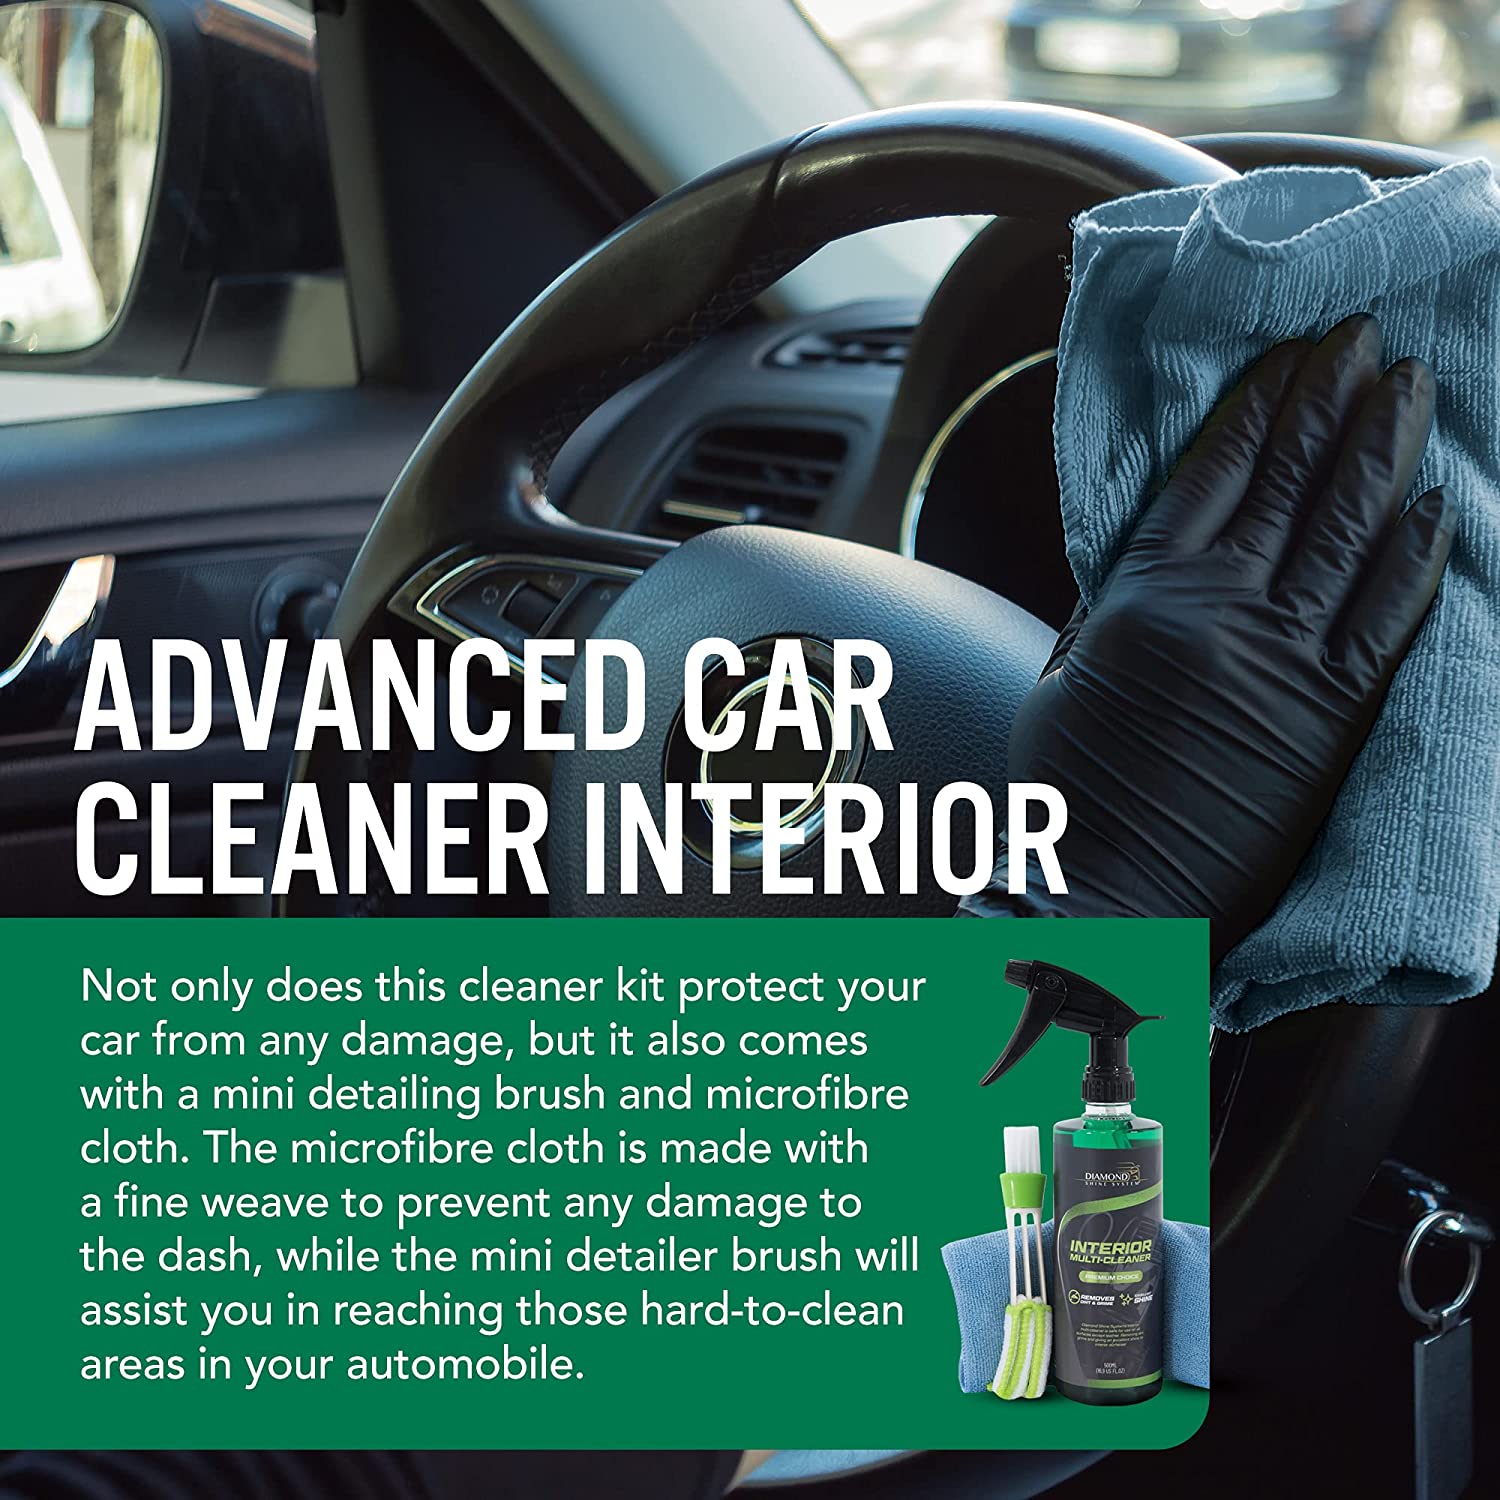 Interior Car Cleaning Kit for Upholstery and Dashboard